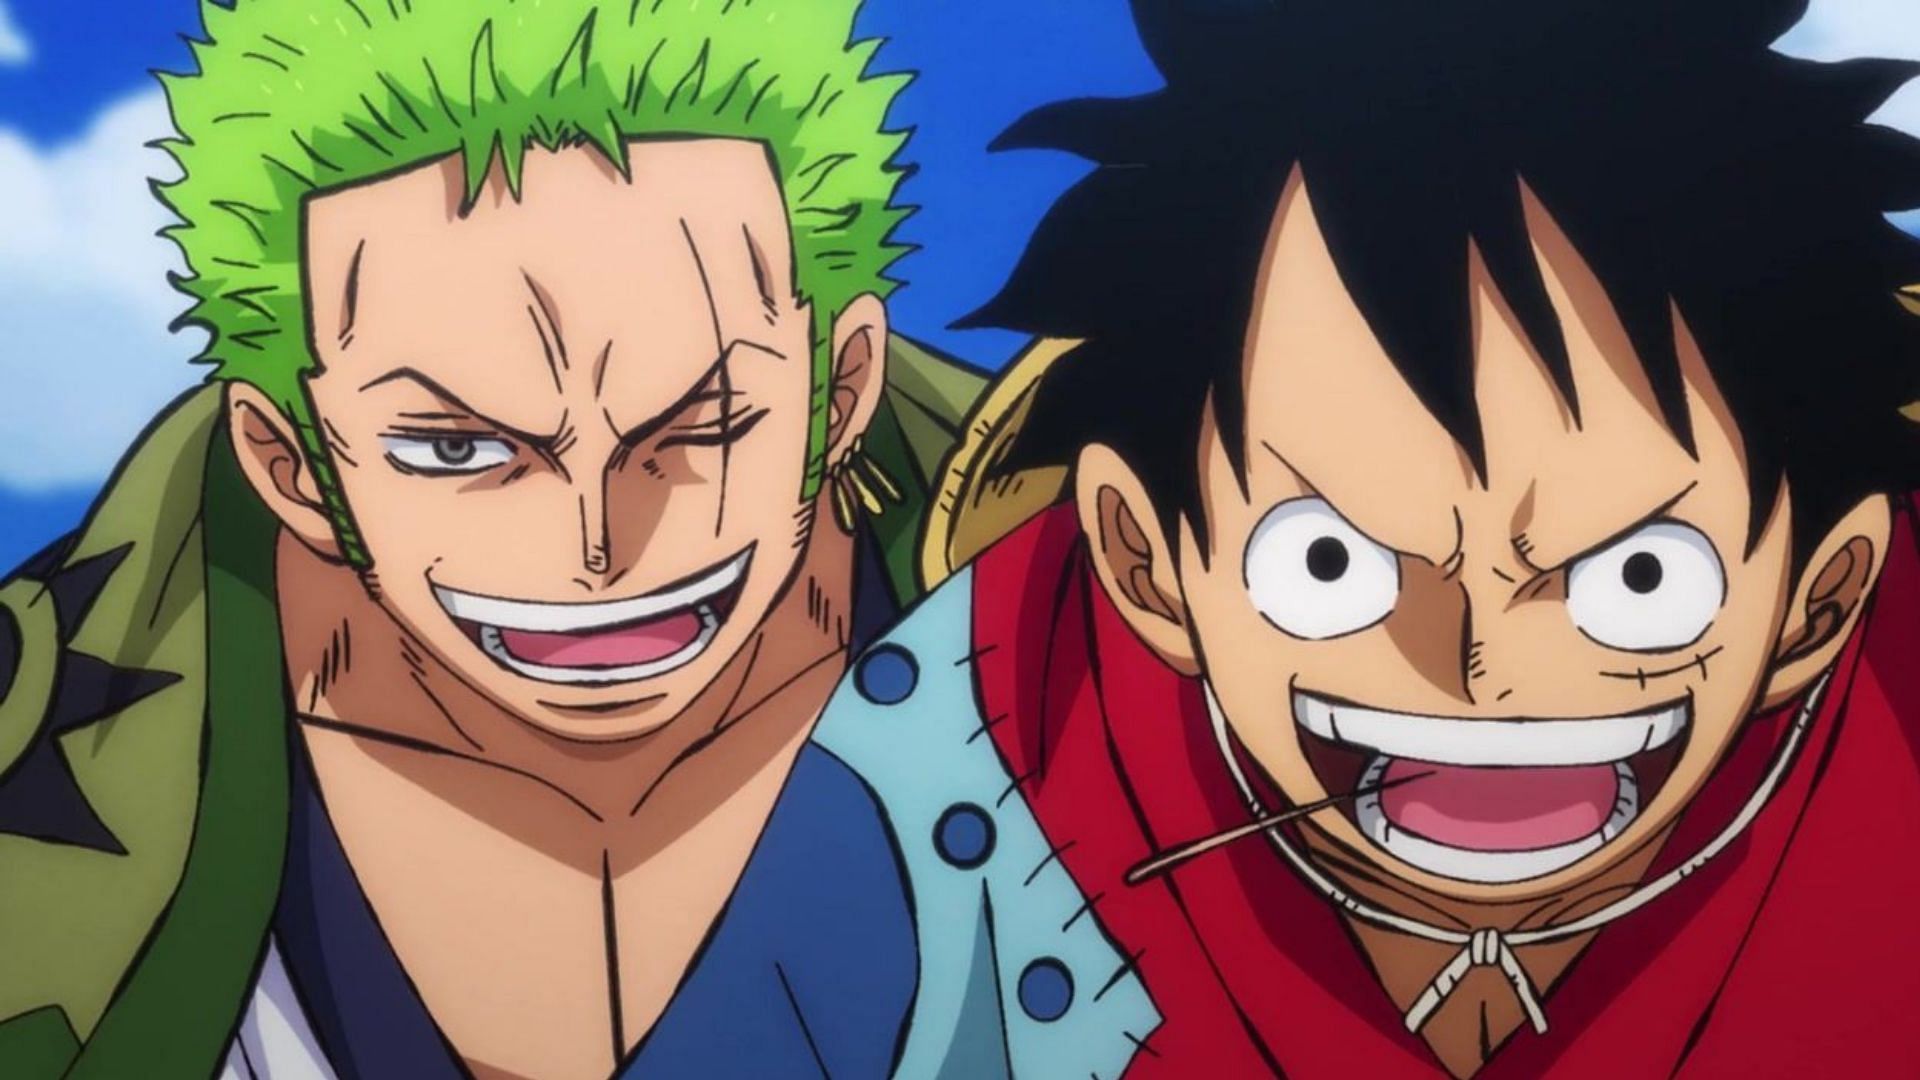 Roronoa Zoro (left) and Monkey D. Luffy (right) from One Piece (Image via Toei Animation)